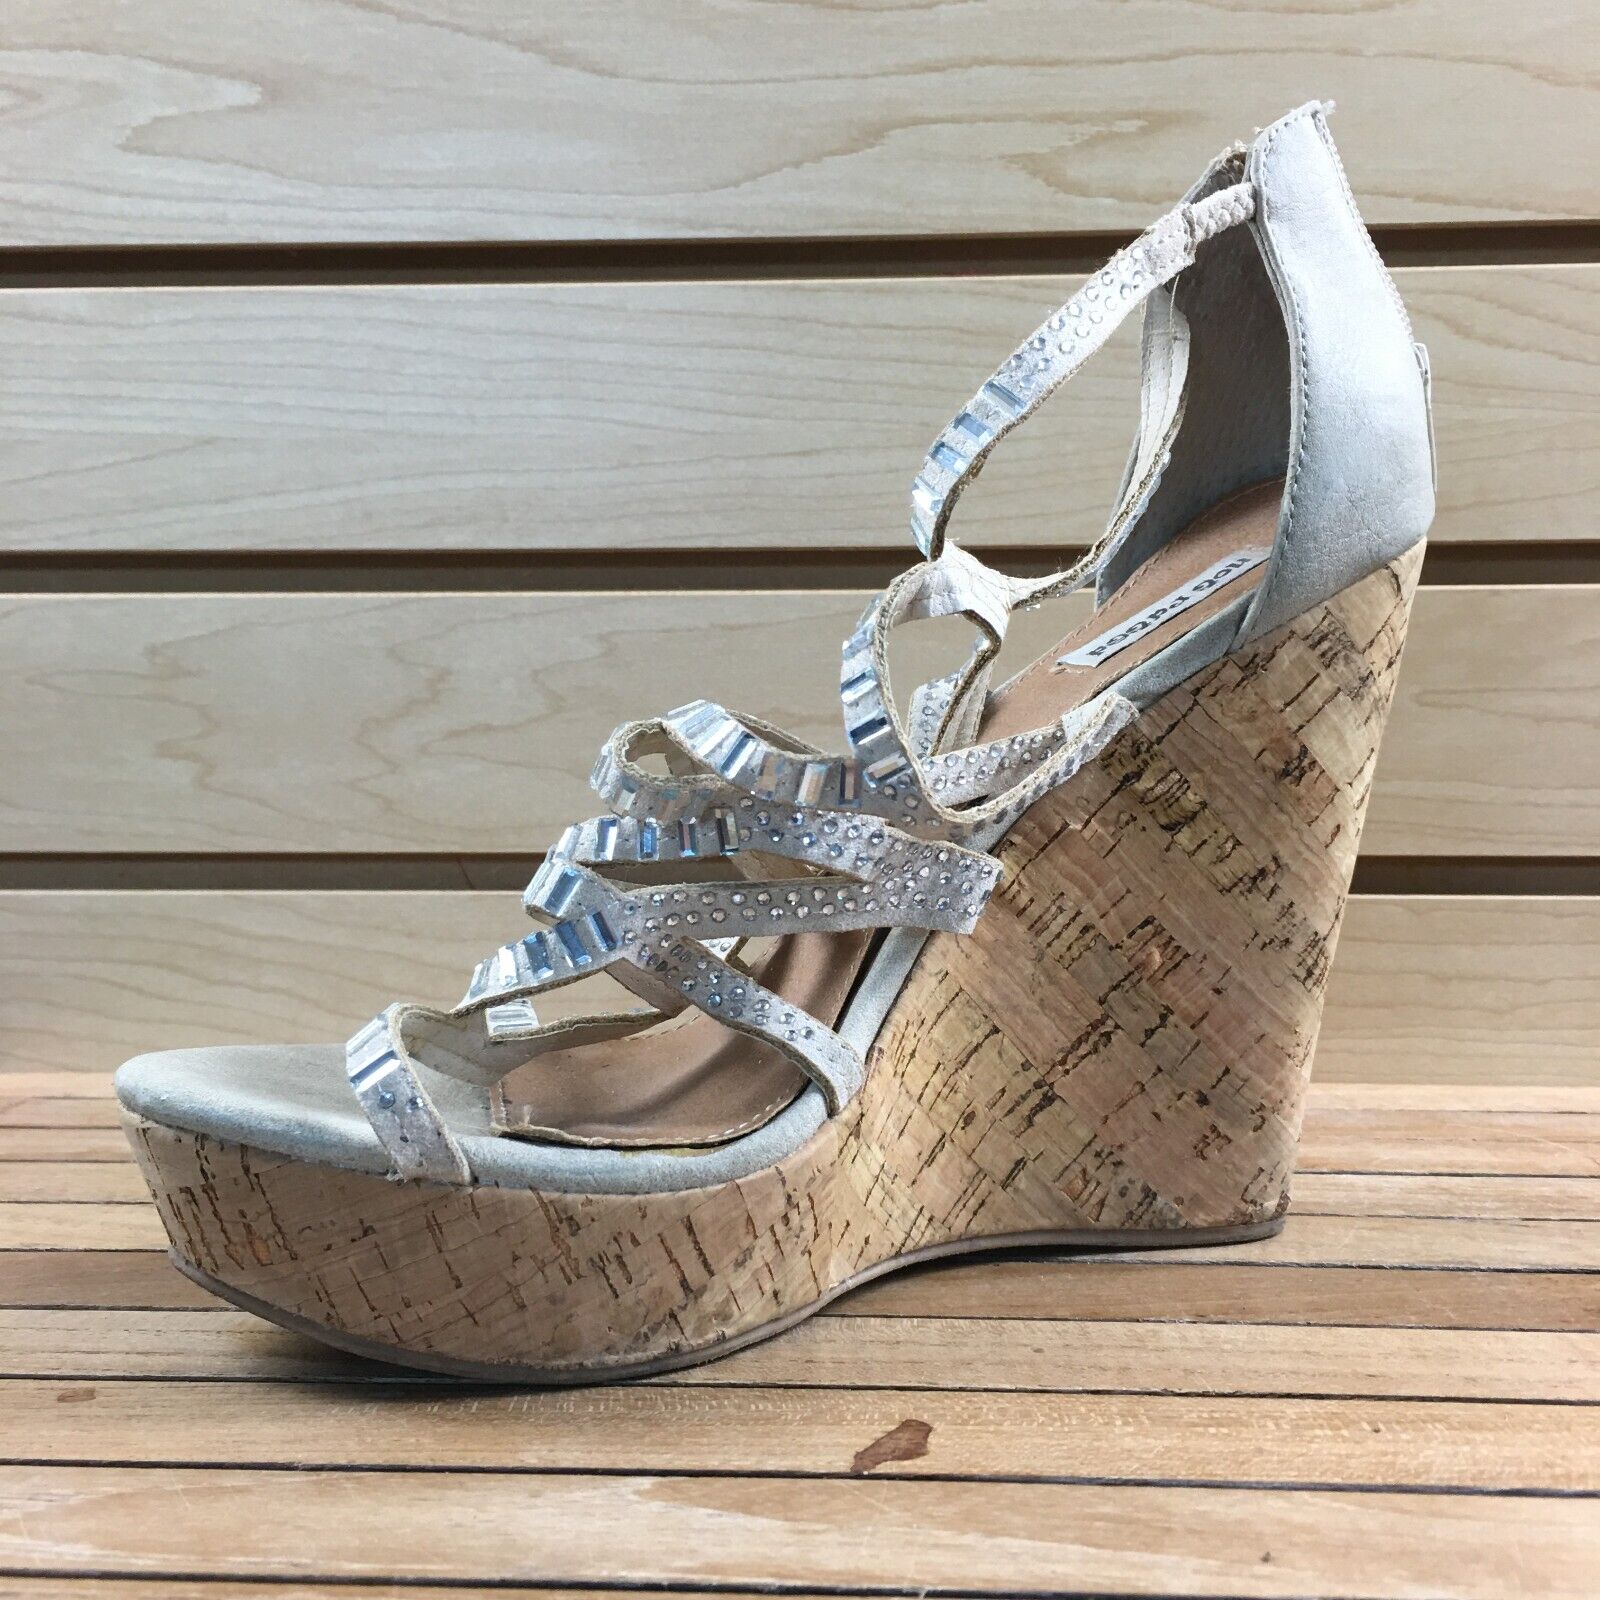 Not Rated Strappy Cork Wedge Heels Women 8.5 Silver Open Toe Sandals Pumps